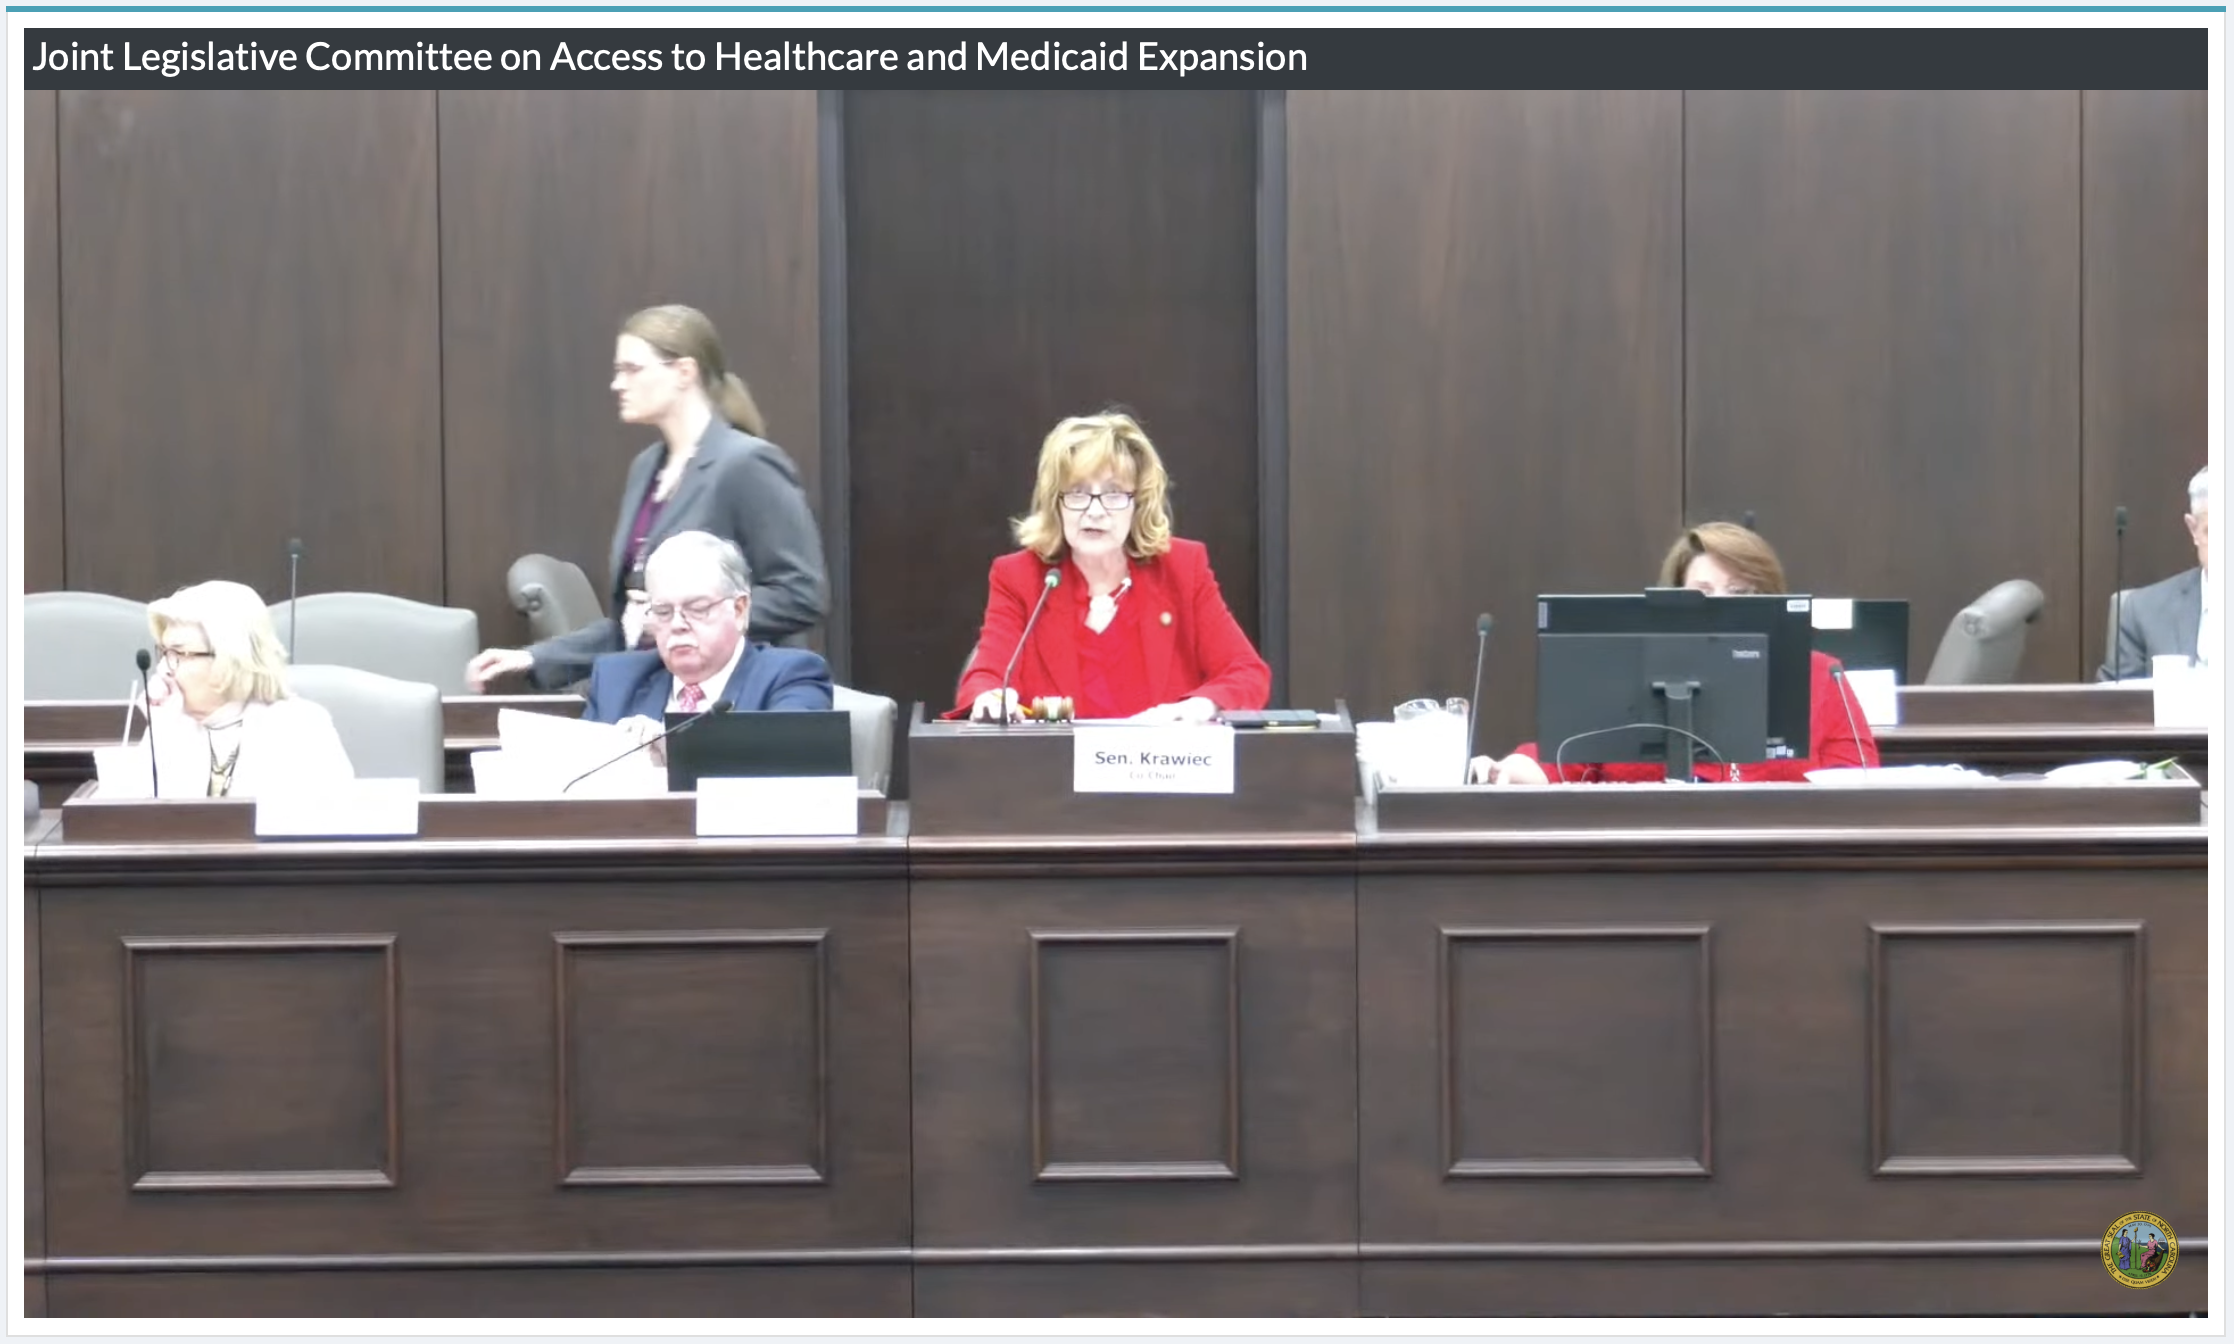 In NC, the Joint Legislative Committee on Access to Healthcare and Medicaid Expansion meets to discuss Certificate of Need reform